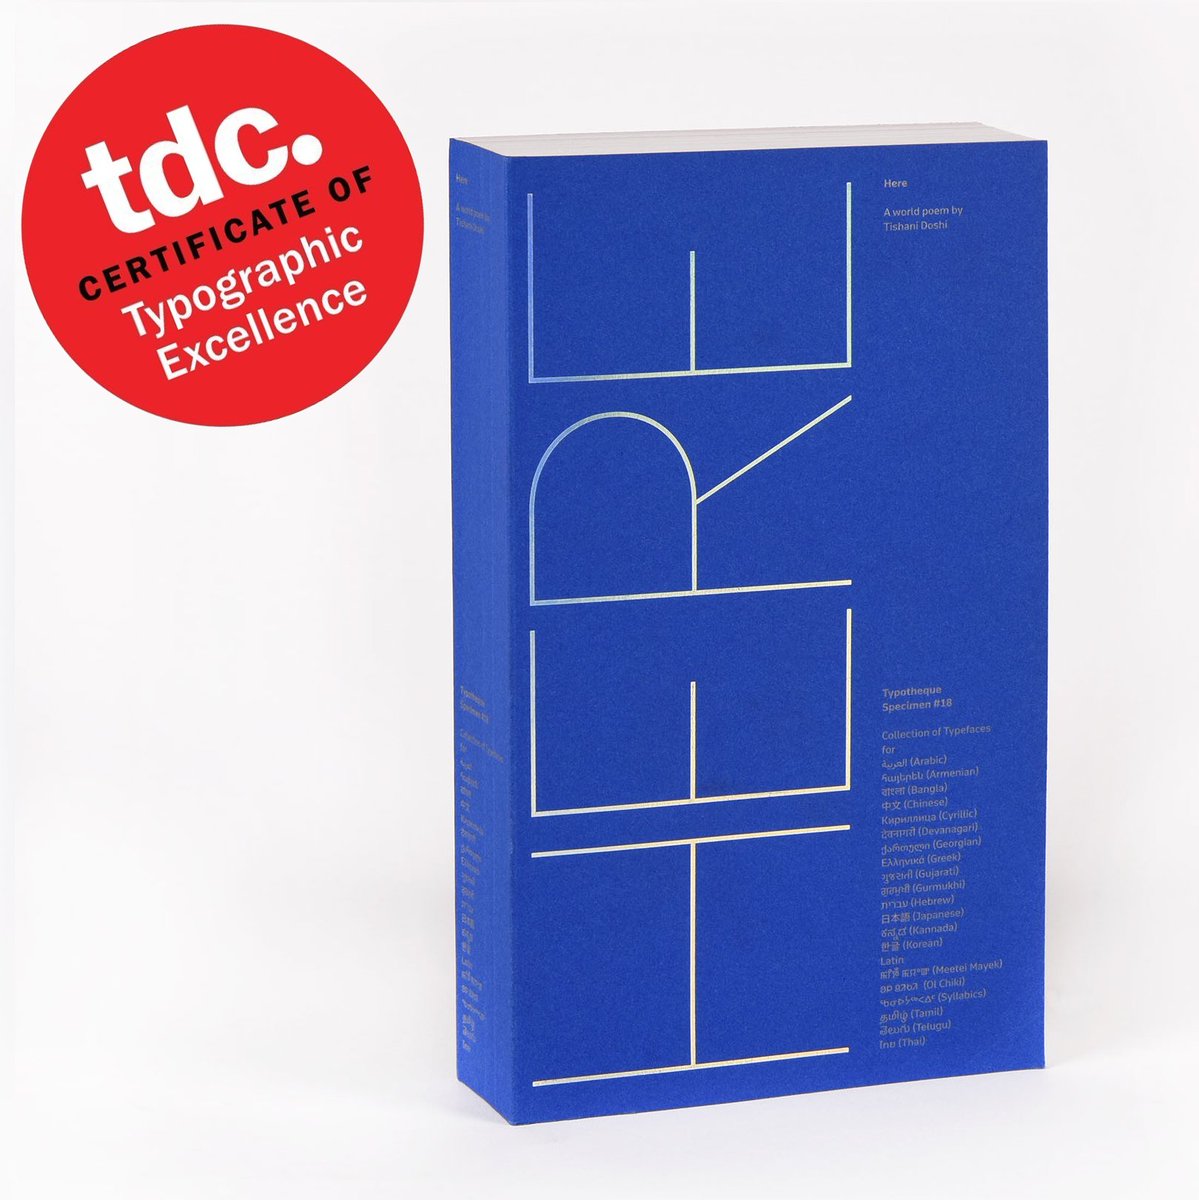 HERE received a Certificate of Typographic Excellence from @typedirectors #TDC68! Our type specimen for @typotheque advocates global unity and communication through @tishanidoshi’s poem and through the work of 175 translators here on Twitter. A great reward for all who helped💙